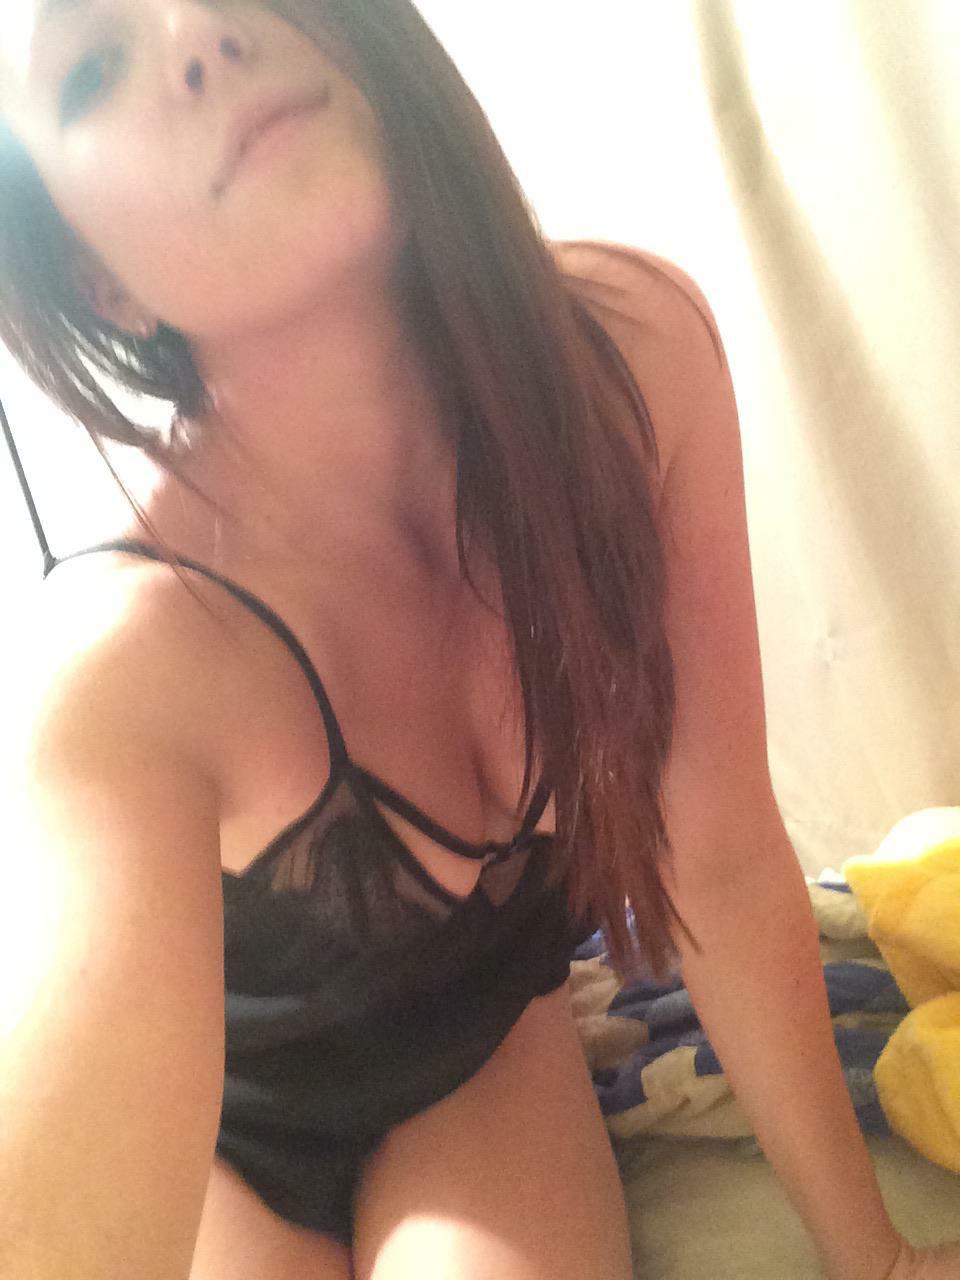 Love the idea of my wife being seduced by another man. Either she tells me or she keeps it a secret. Letâ€™s chat on kik. Please be bi and hq nude photo